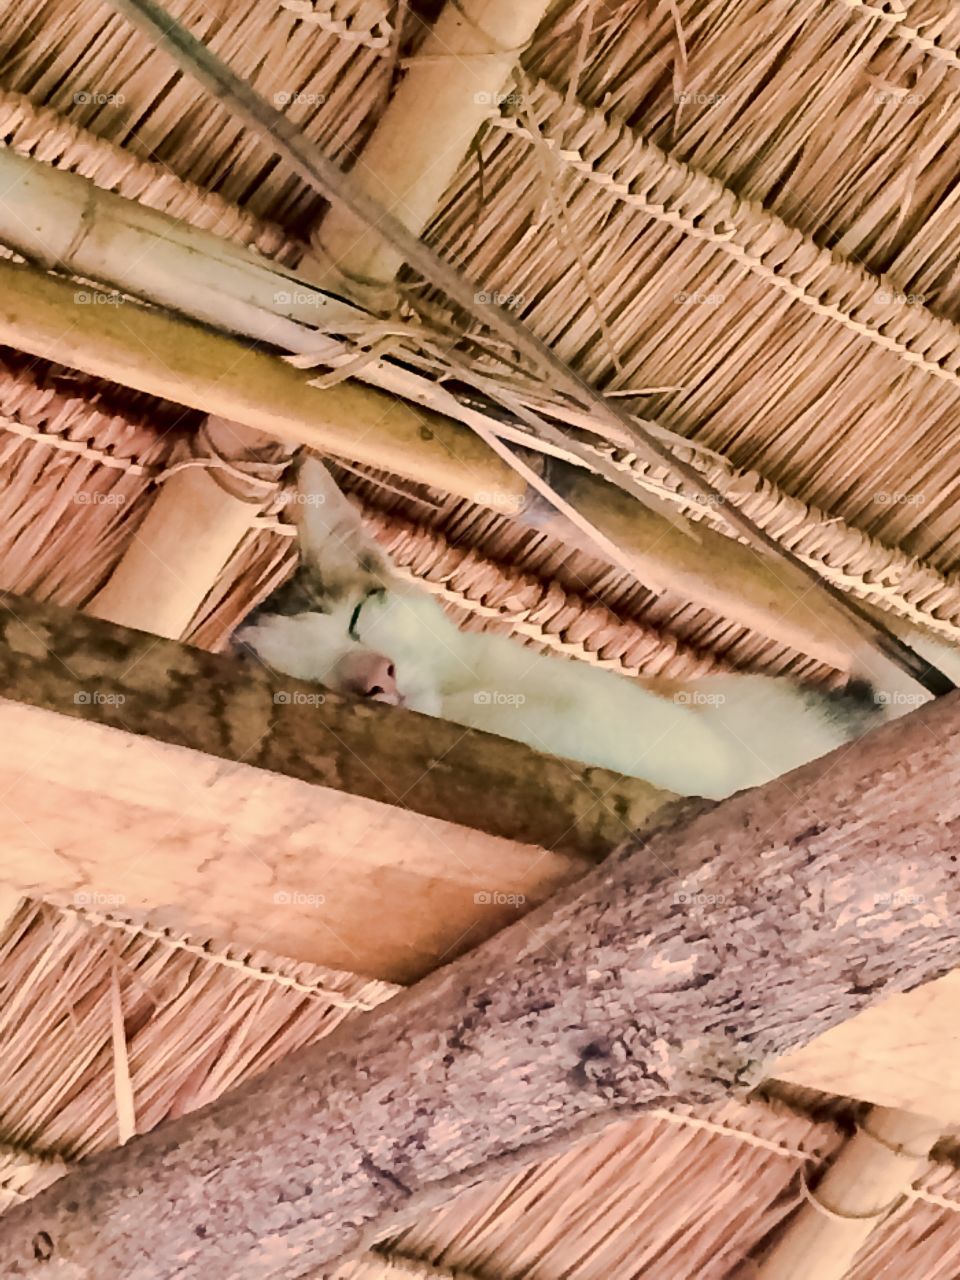 Cat Nap Up In The Rafters Of Our Chiang Mai, Thailand Village Homestay Hut.